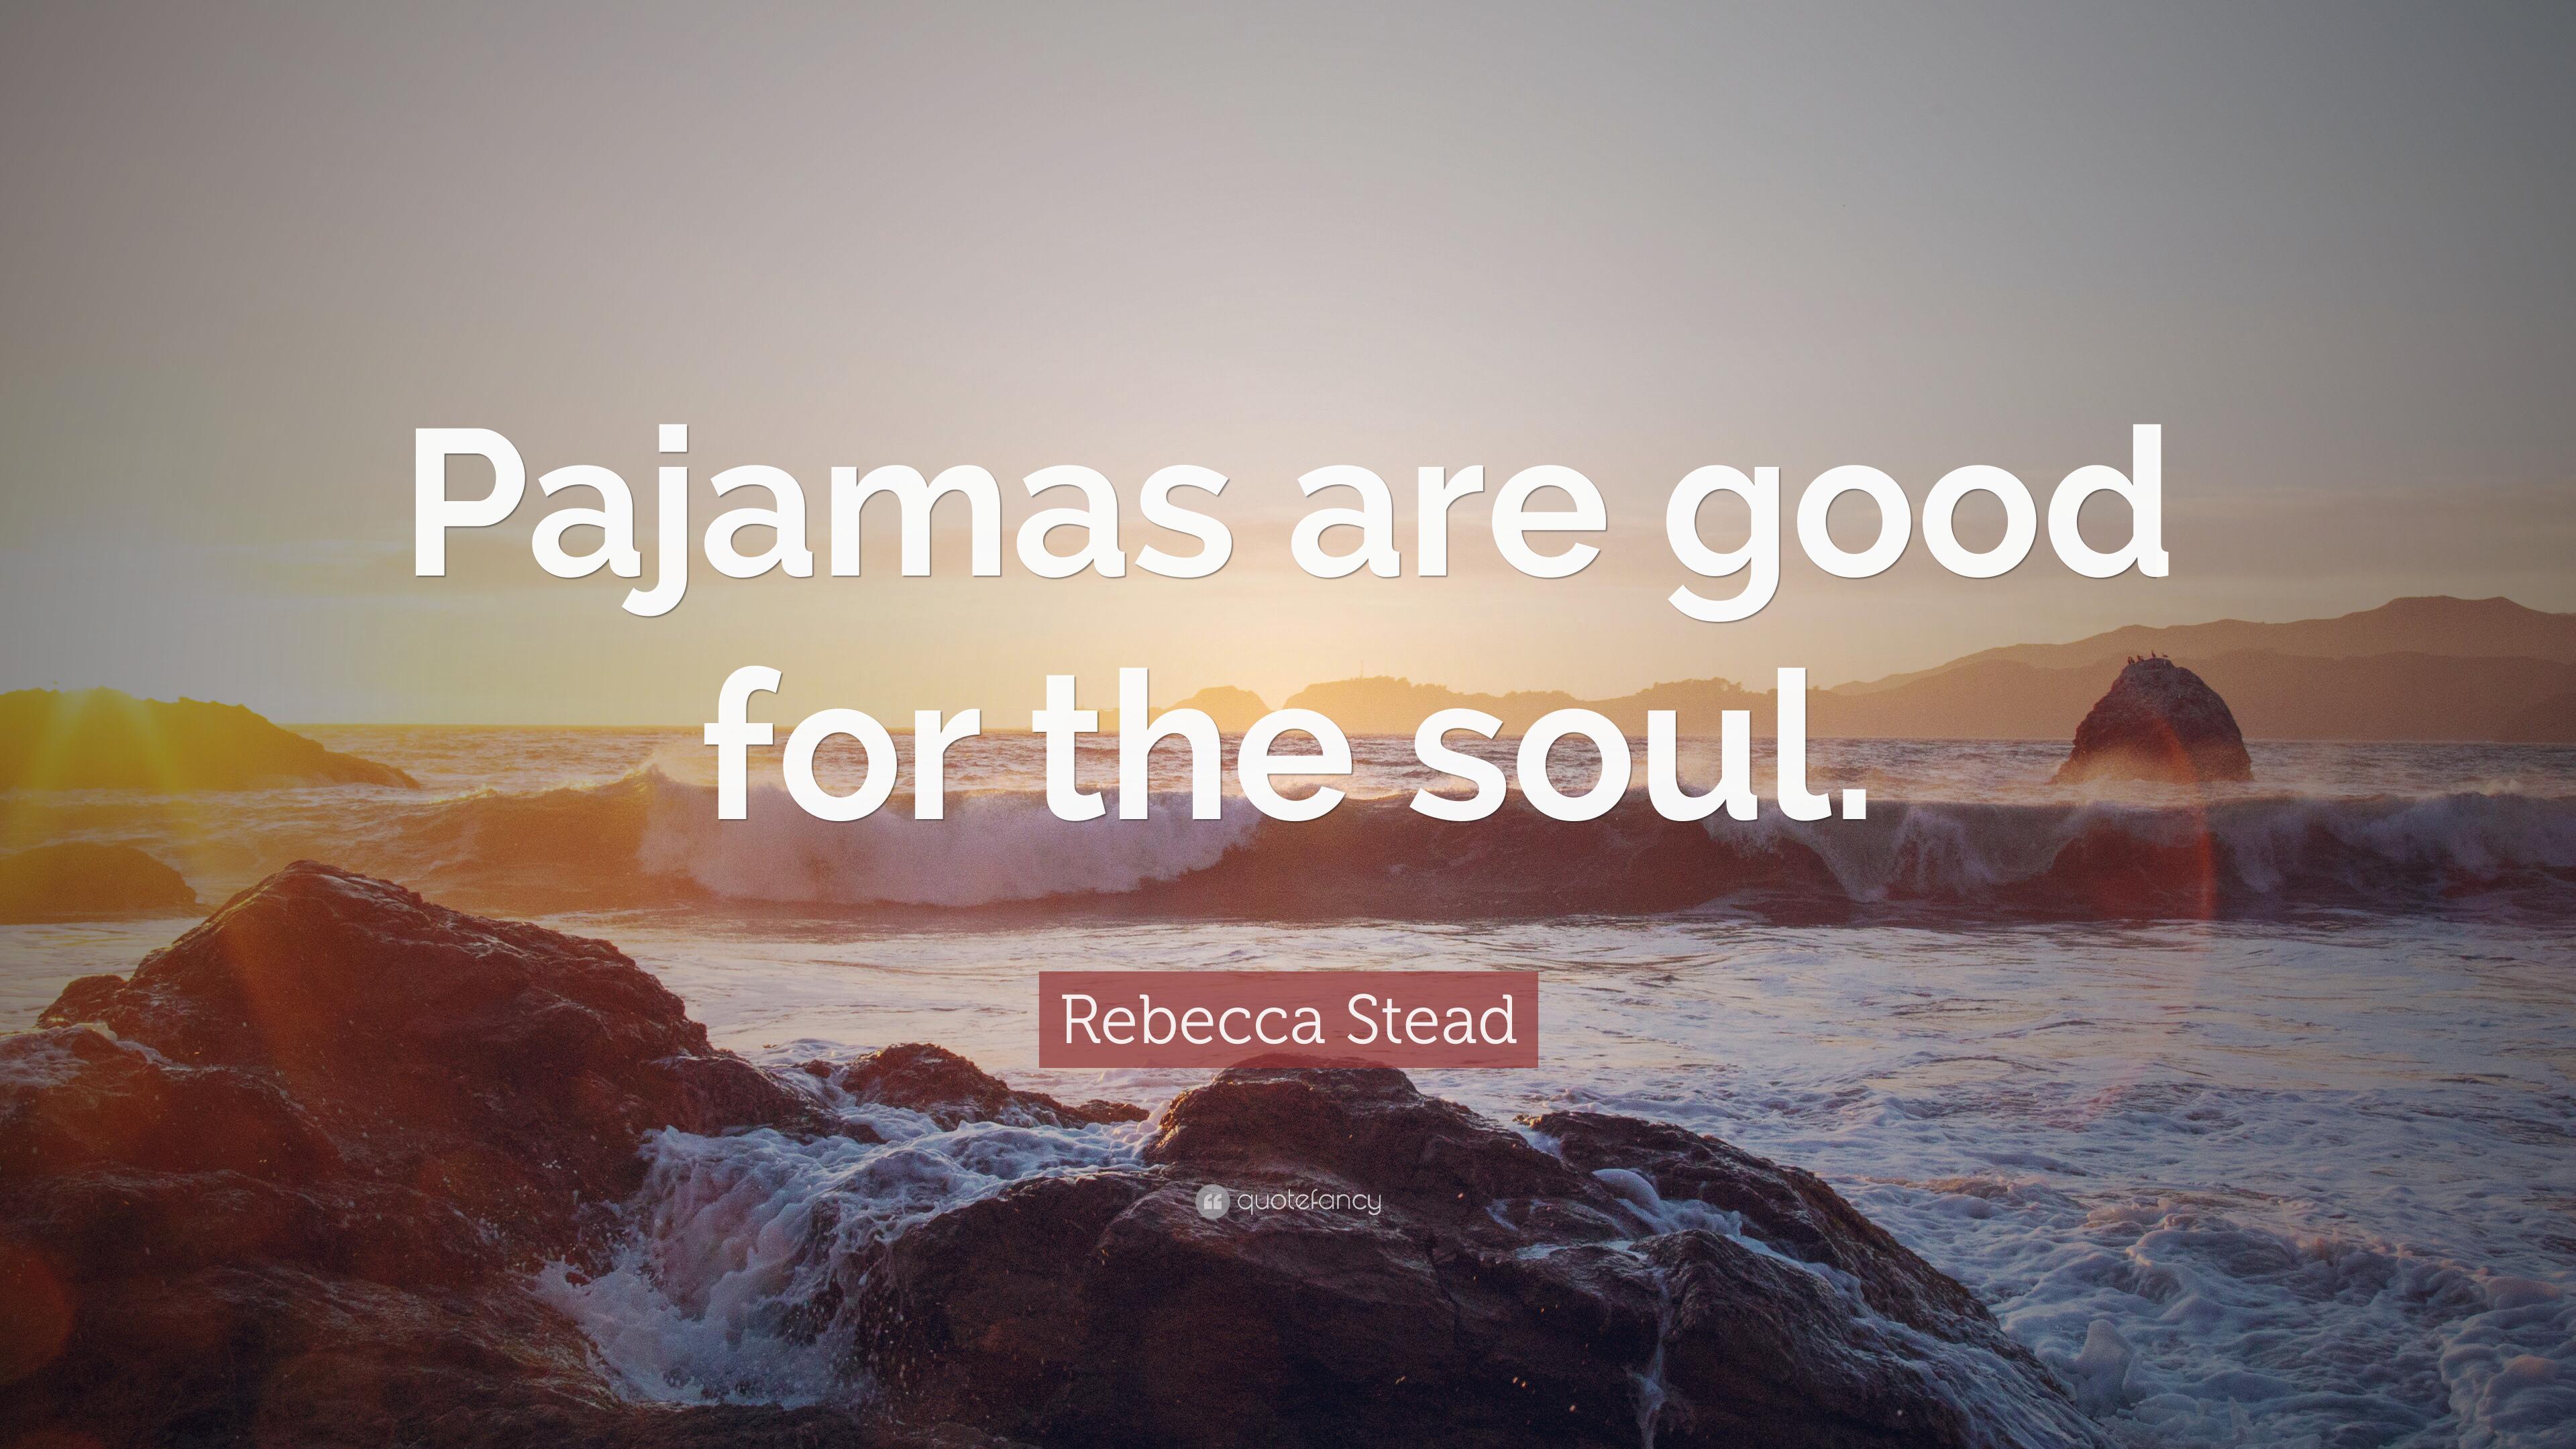 Rebecca Stead Quote: “Pajamas are good for the soul.” 7